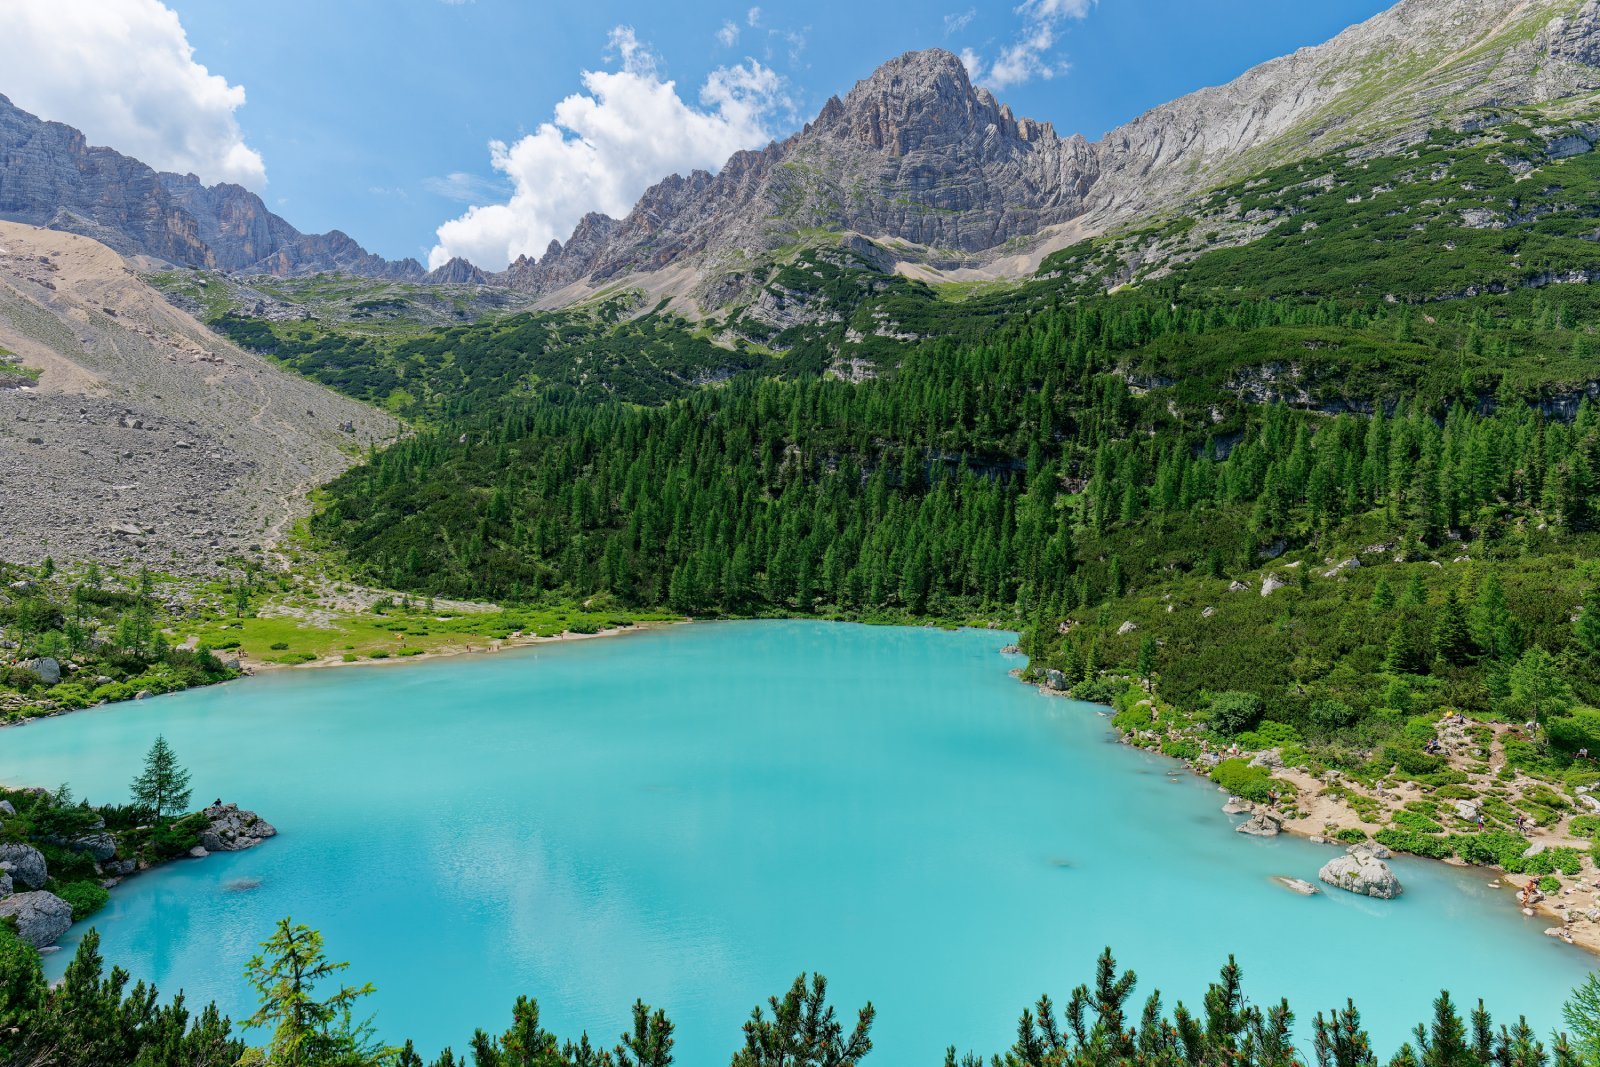 <p class="wp-caption-text">Image Credit: Shutterstock / stu.dio</p>  <p><span>Lago di Sorapiss, with its distinctive turquoise waters, is a hidden gem in the Dolomites. The lake is reached via a moderately challenging hike through the Sorapiss mountain range, offering stunning views and a tranquil setting. The journey to the lake is an adventure in itself, featuring narrow paths, wooden bridges, and dramatic cliffside views.</span></p>